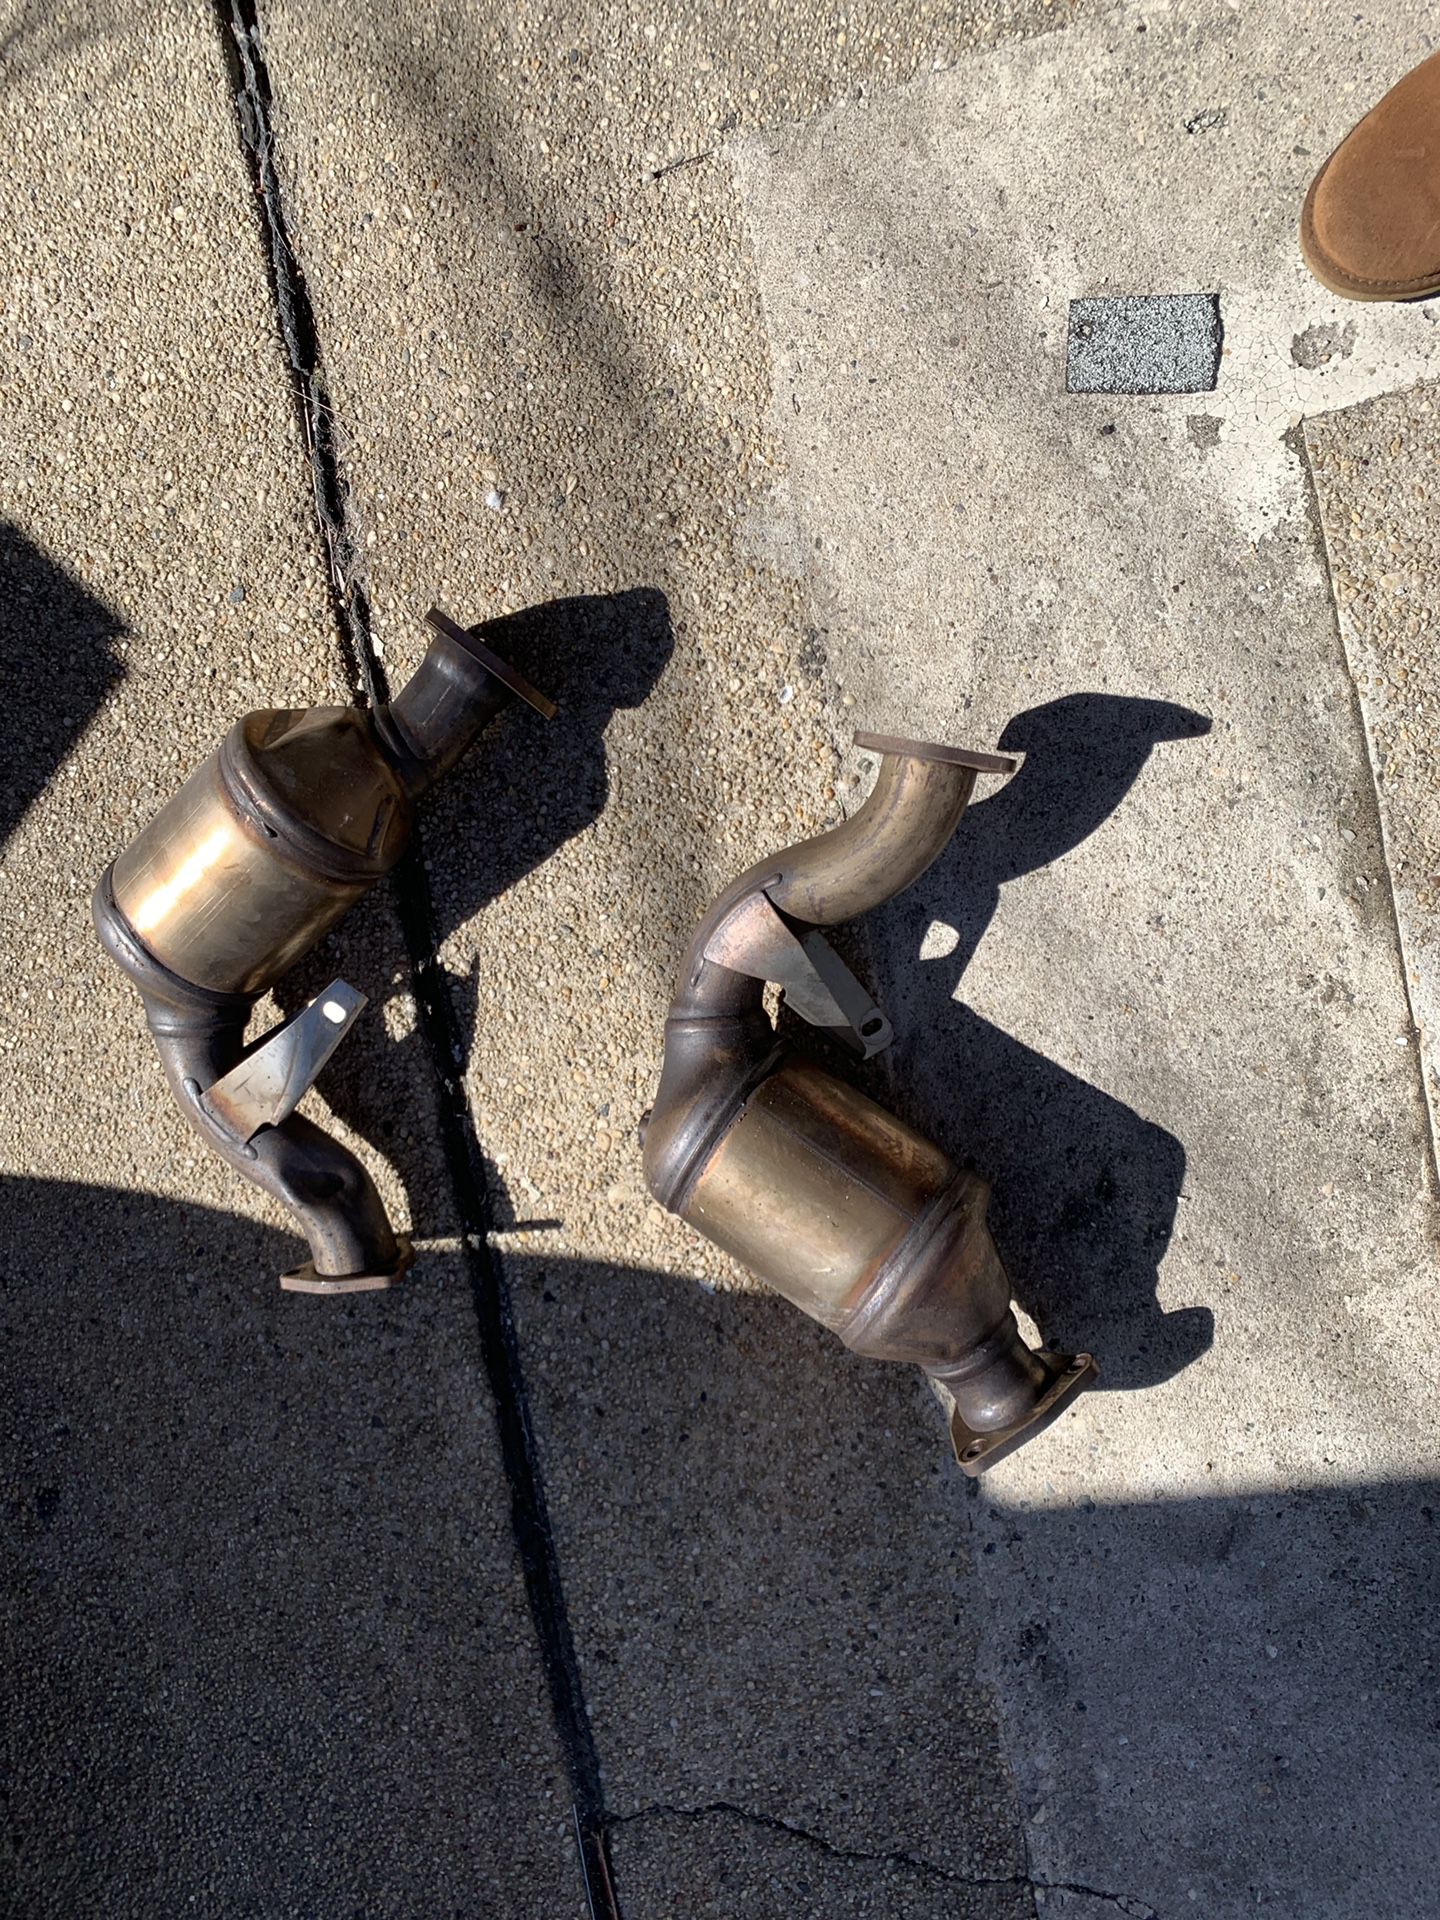 Audi s4 stock parts (catalytic converters, air intake, and oem grille)